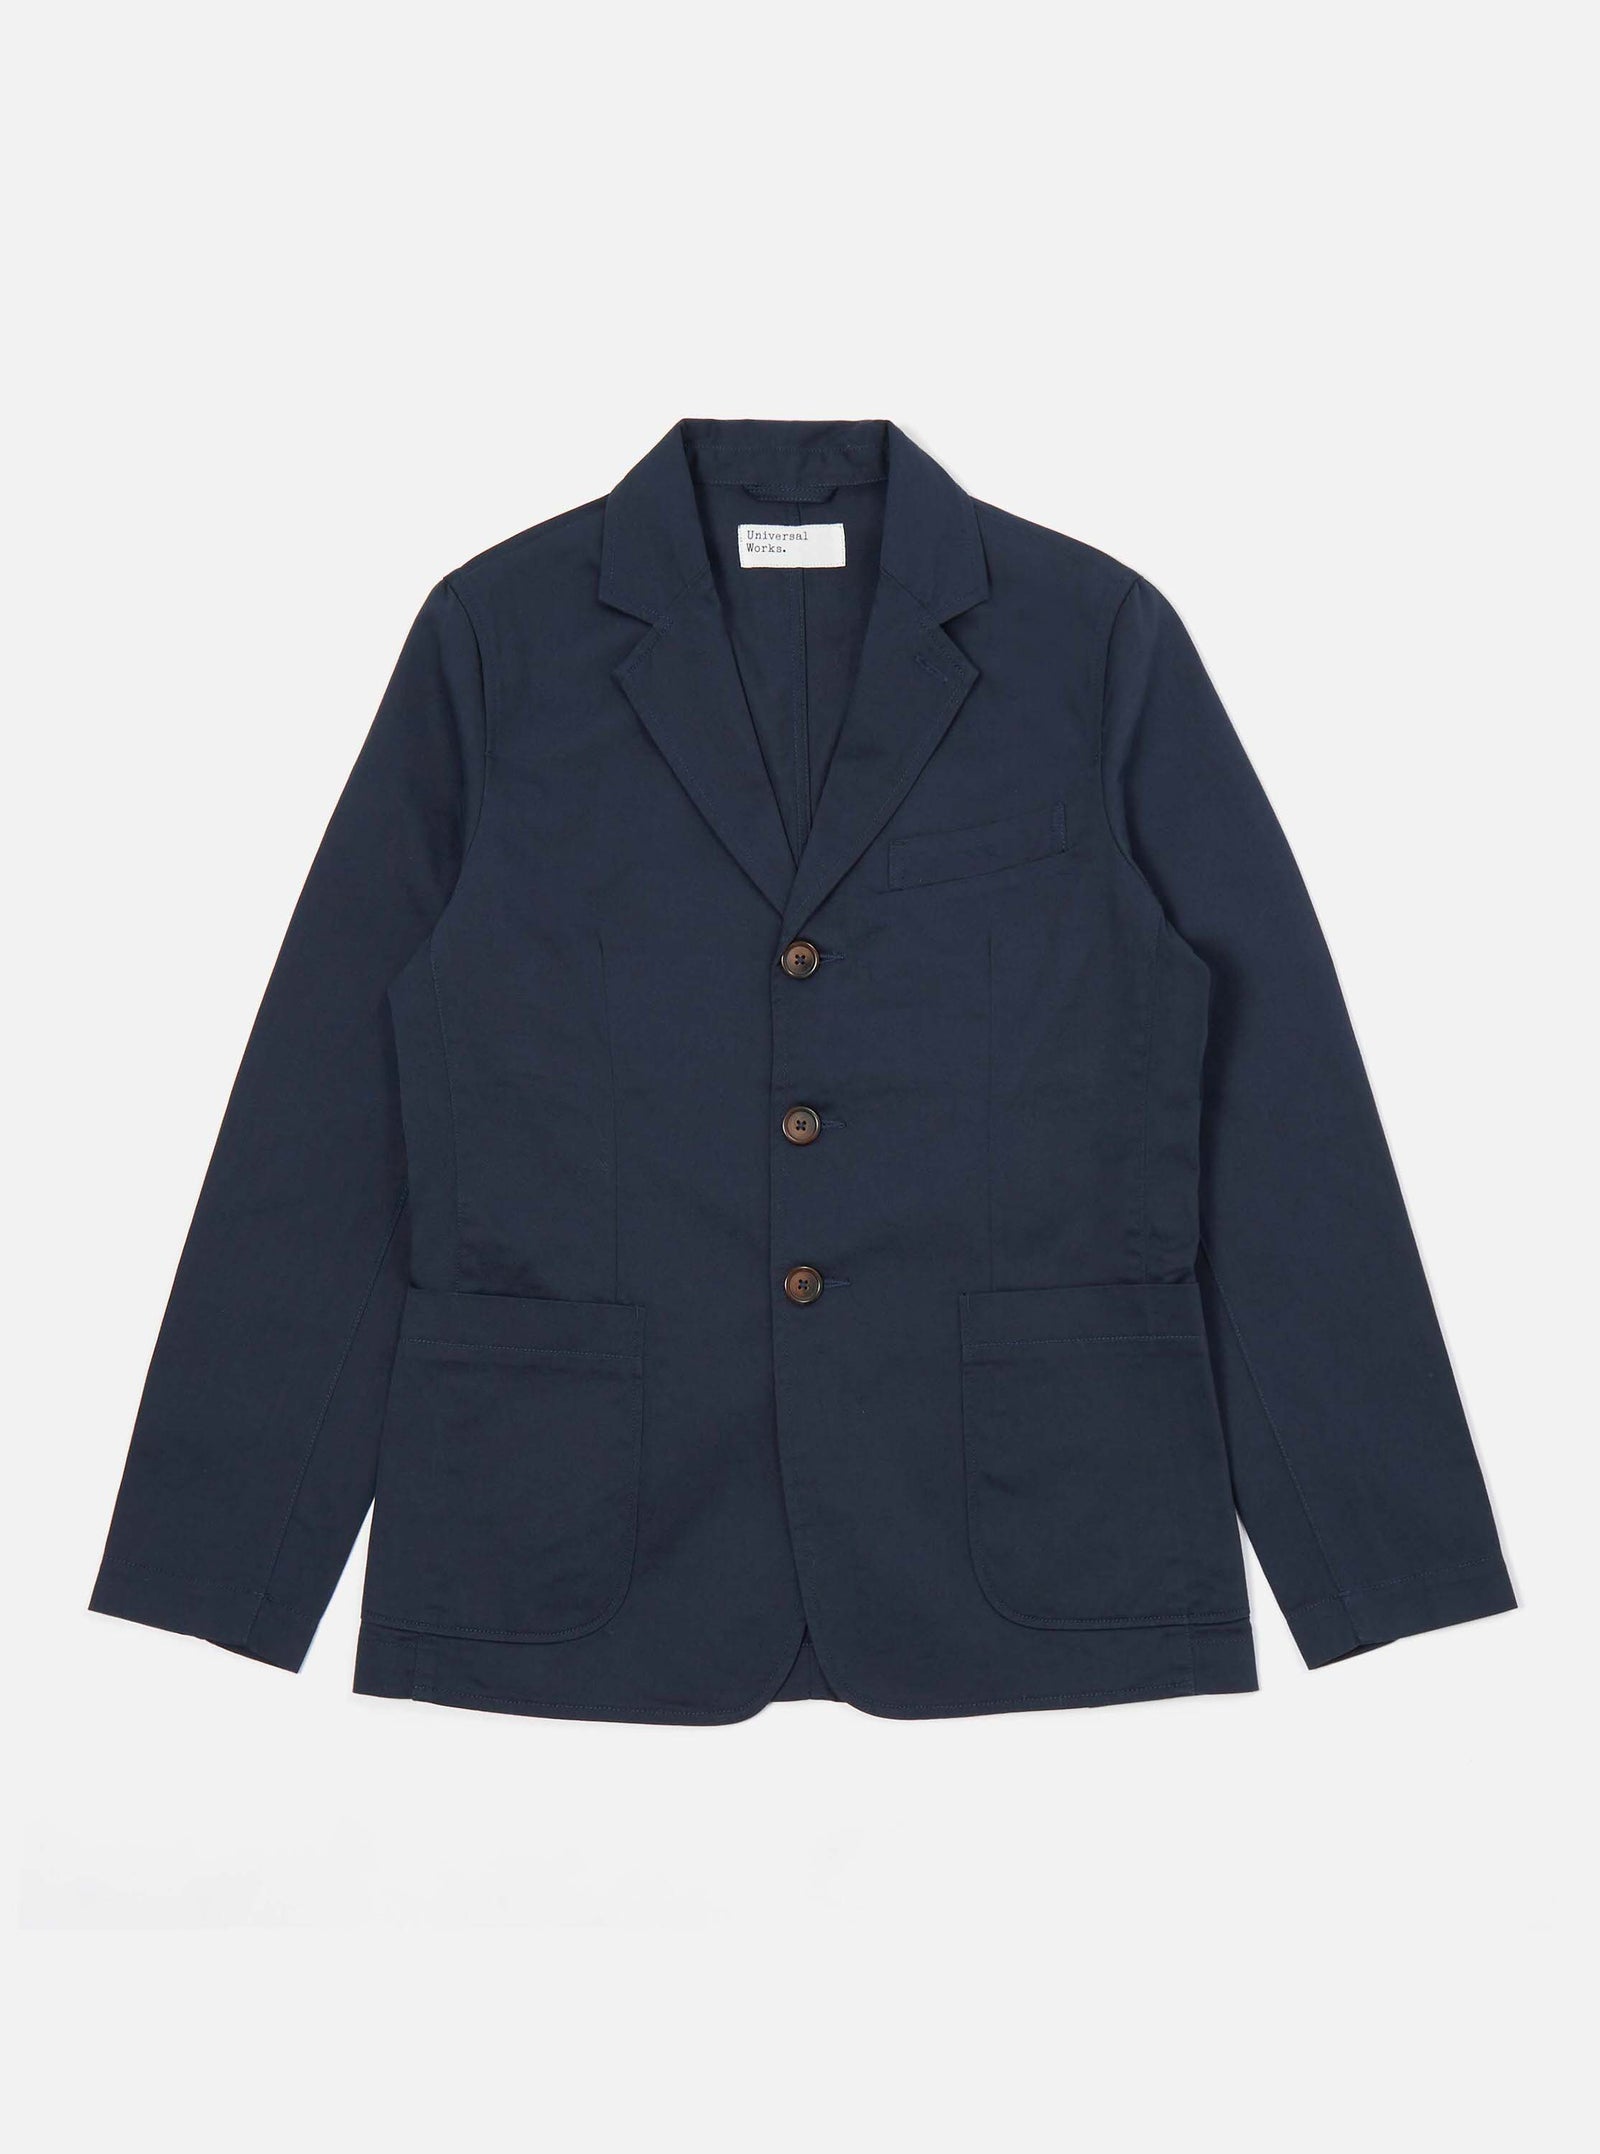 Universal Works Bakers Jacket in Navy Twill